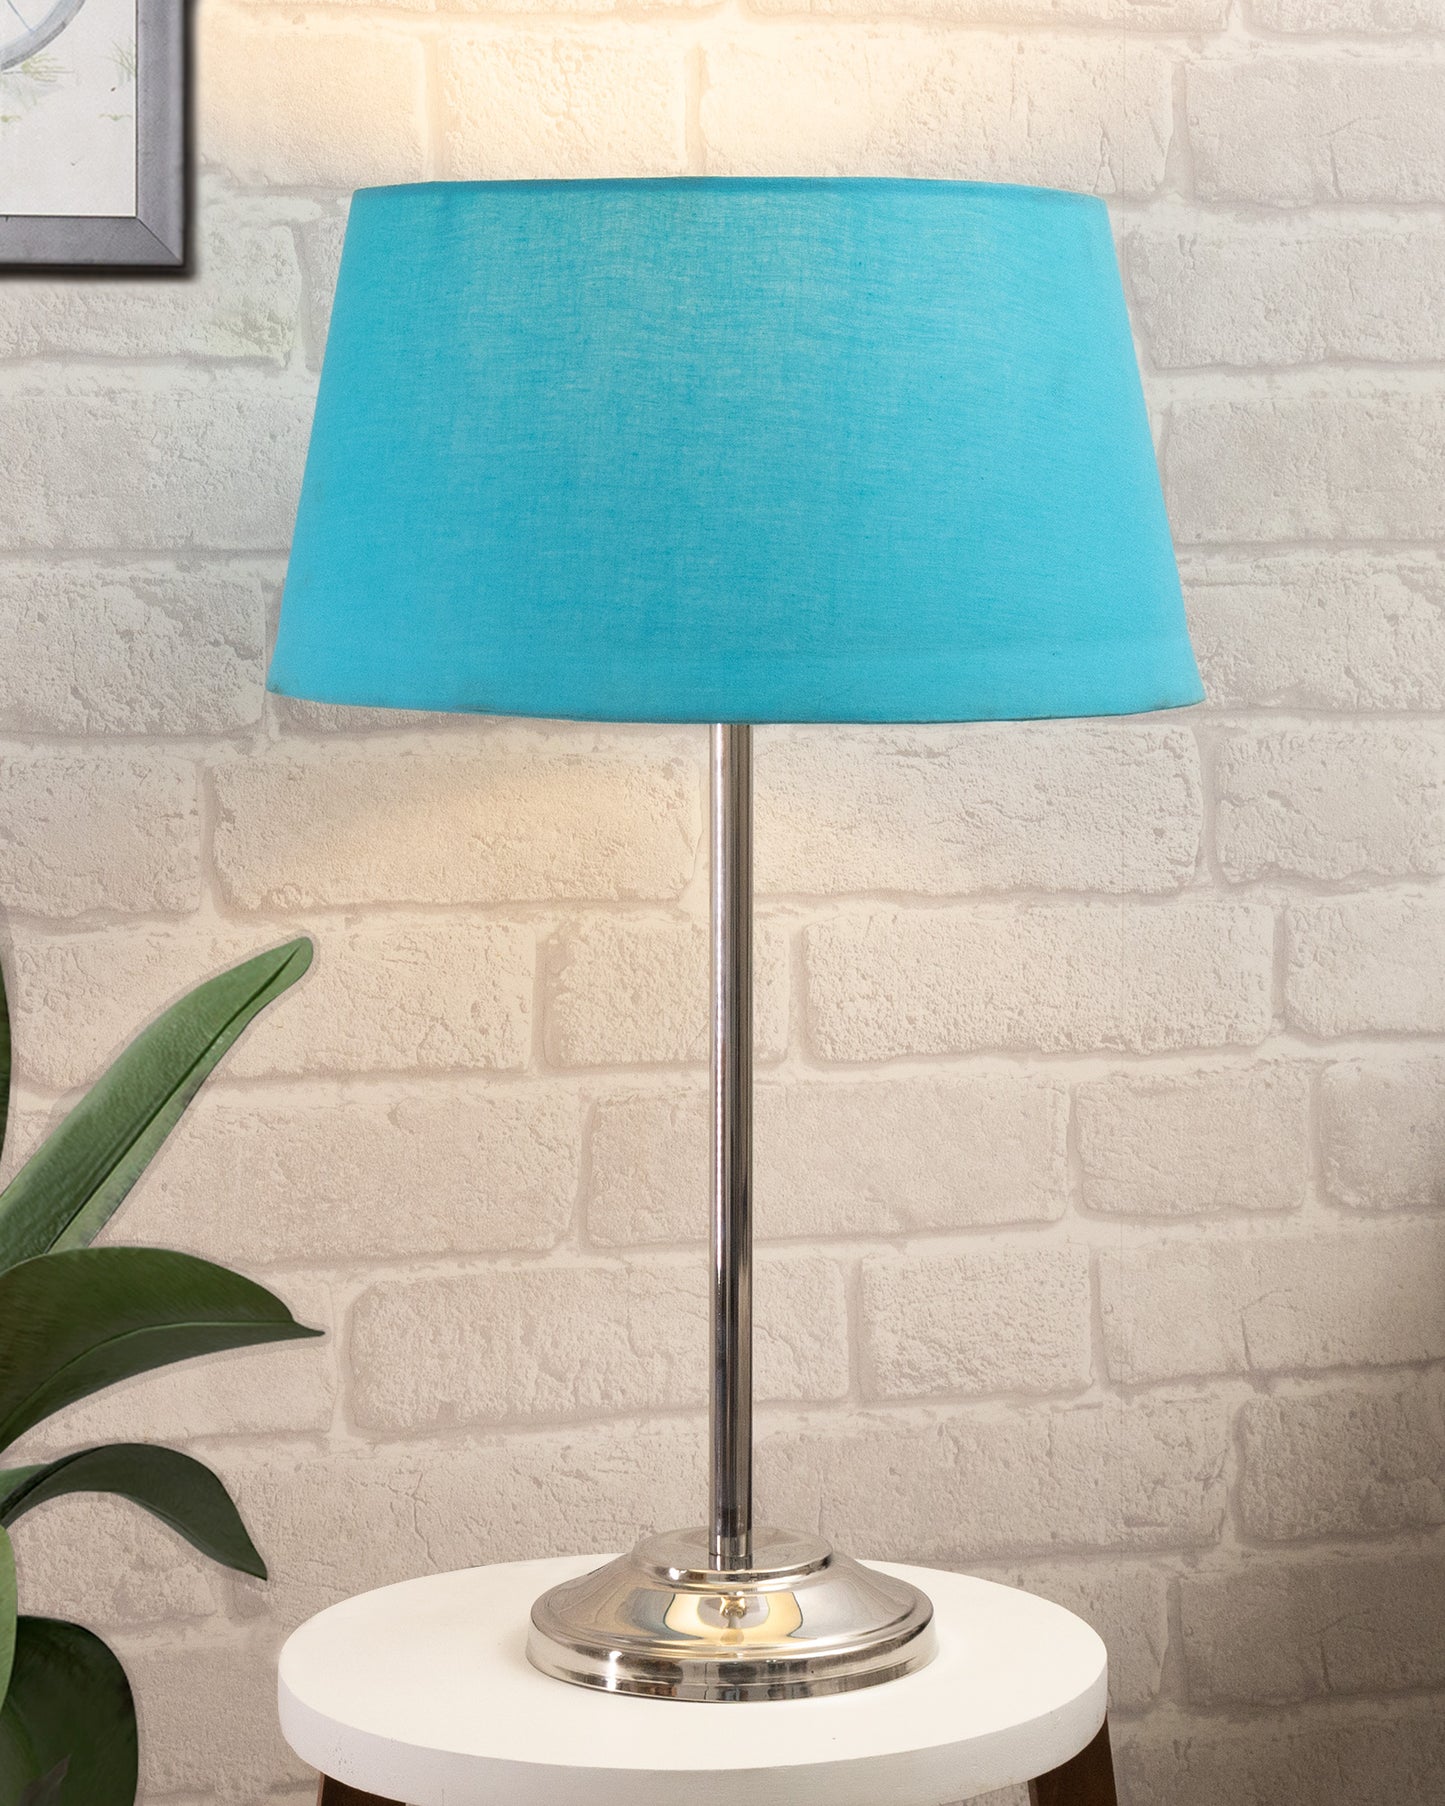 Gray Chrome 13" Basic Table Lamp with Fabric Shade, Bedside Light